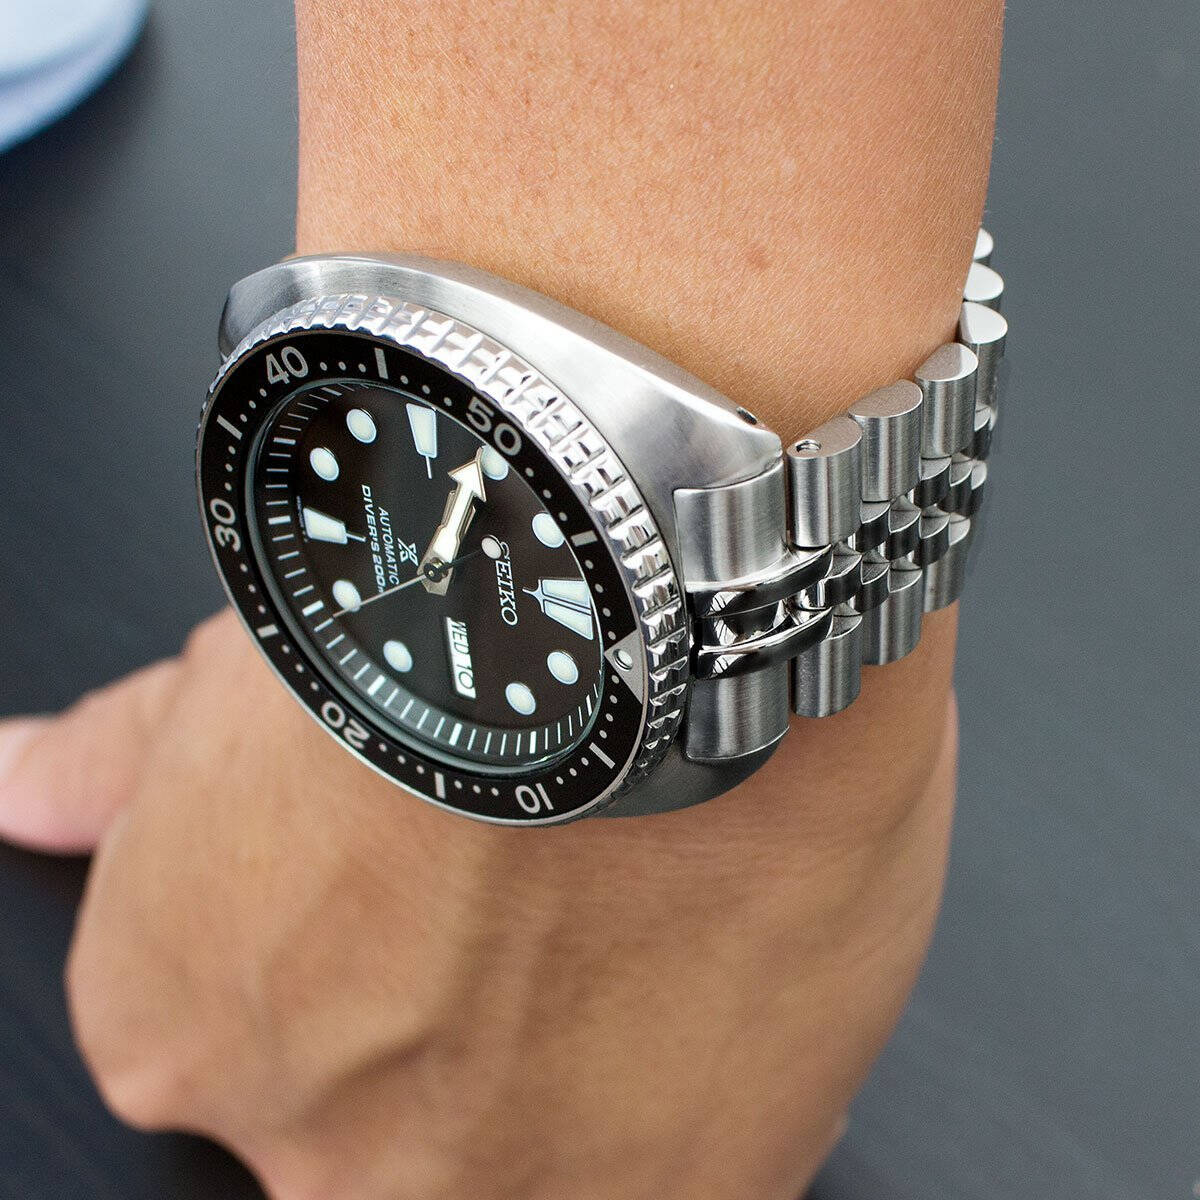 MiLTAT Super 3D Jubilee Brushed steel band for Seiko Turtle